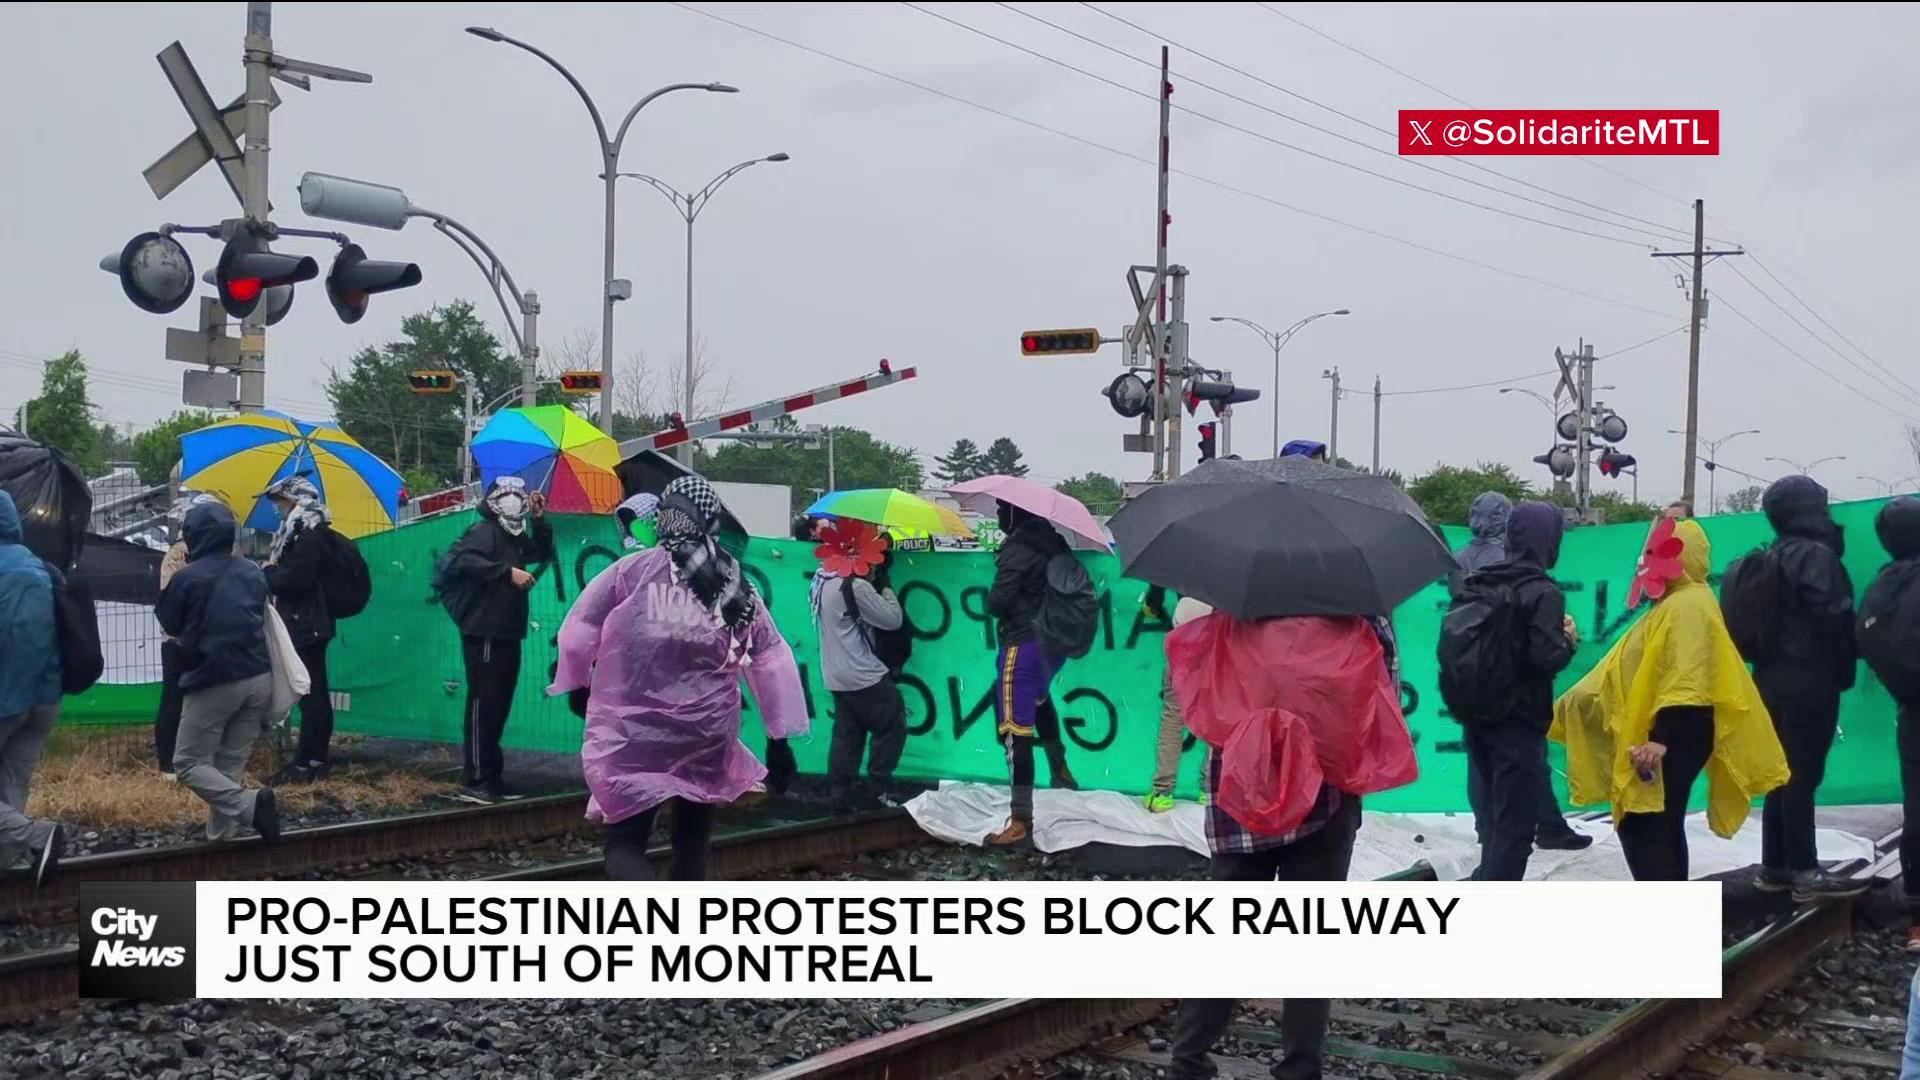 Pro-Palestinian protesters block railway south of Montreal